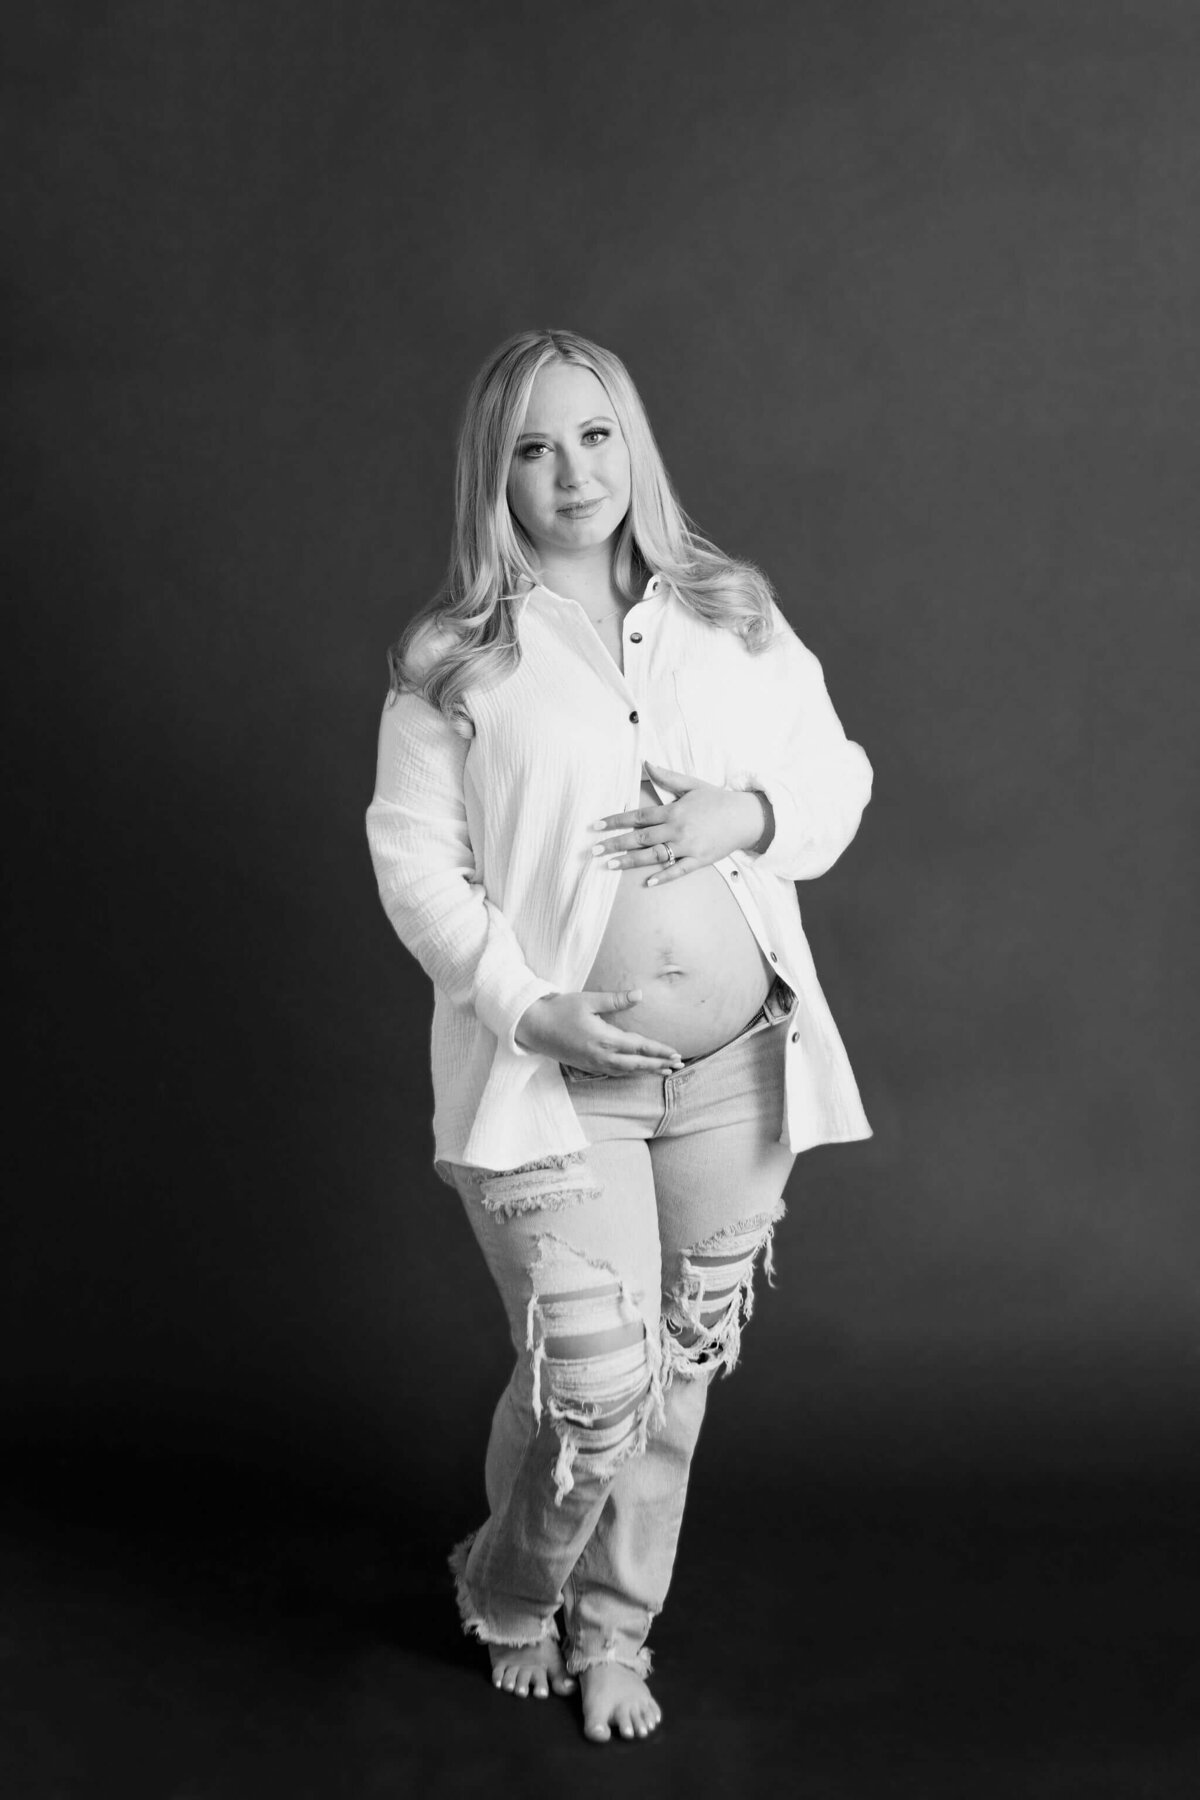 black and white maternity portrait of expecting mother in white button up shirt and jeans